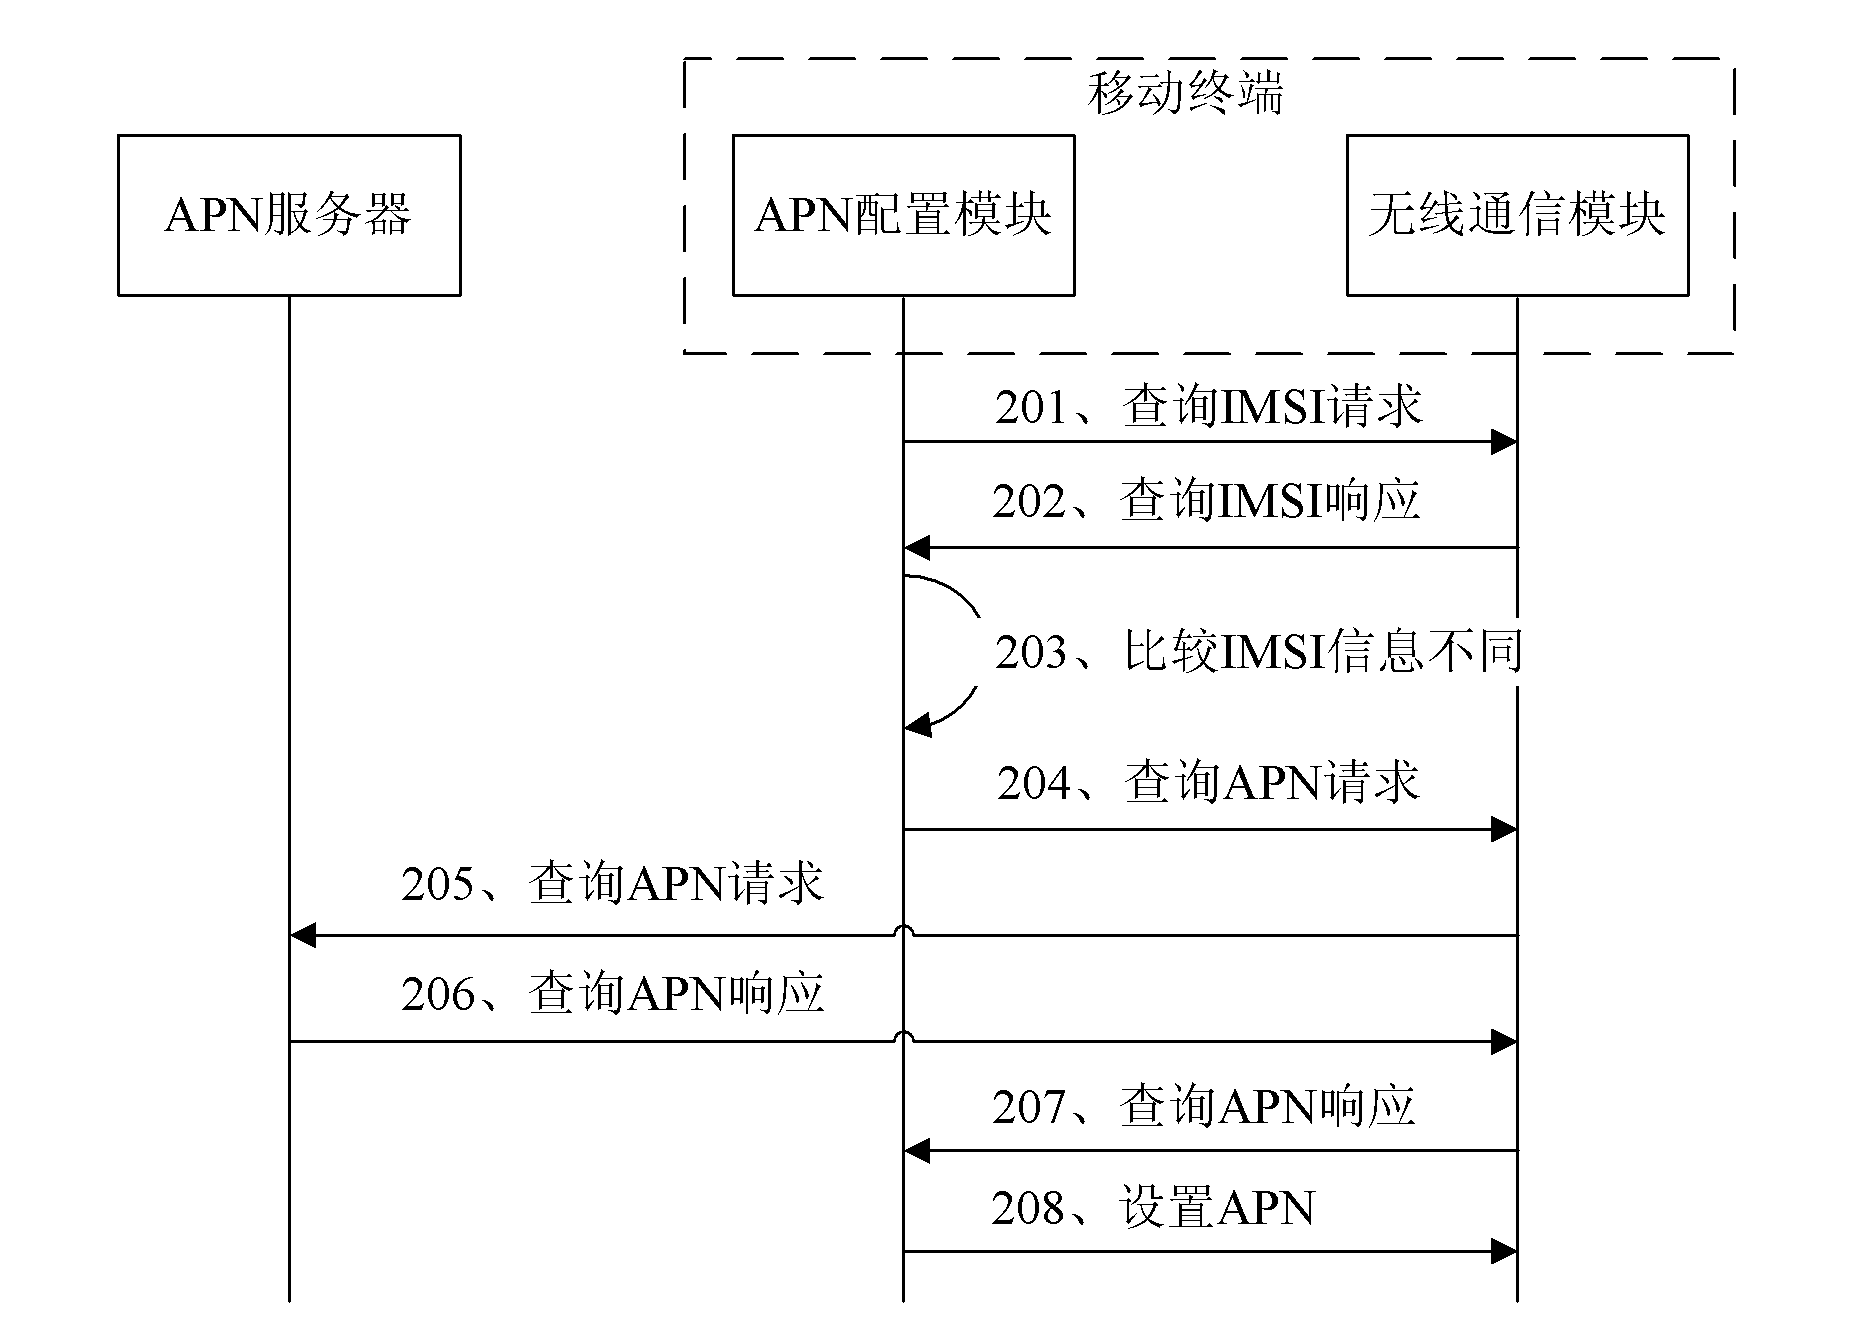 Mobile terminal as well as system and method for realizing access point name setting